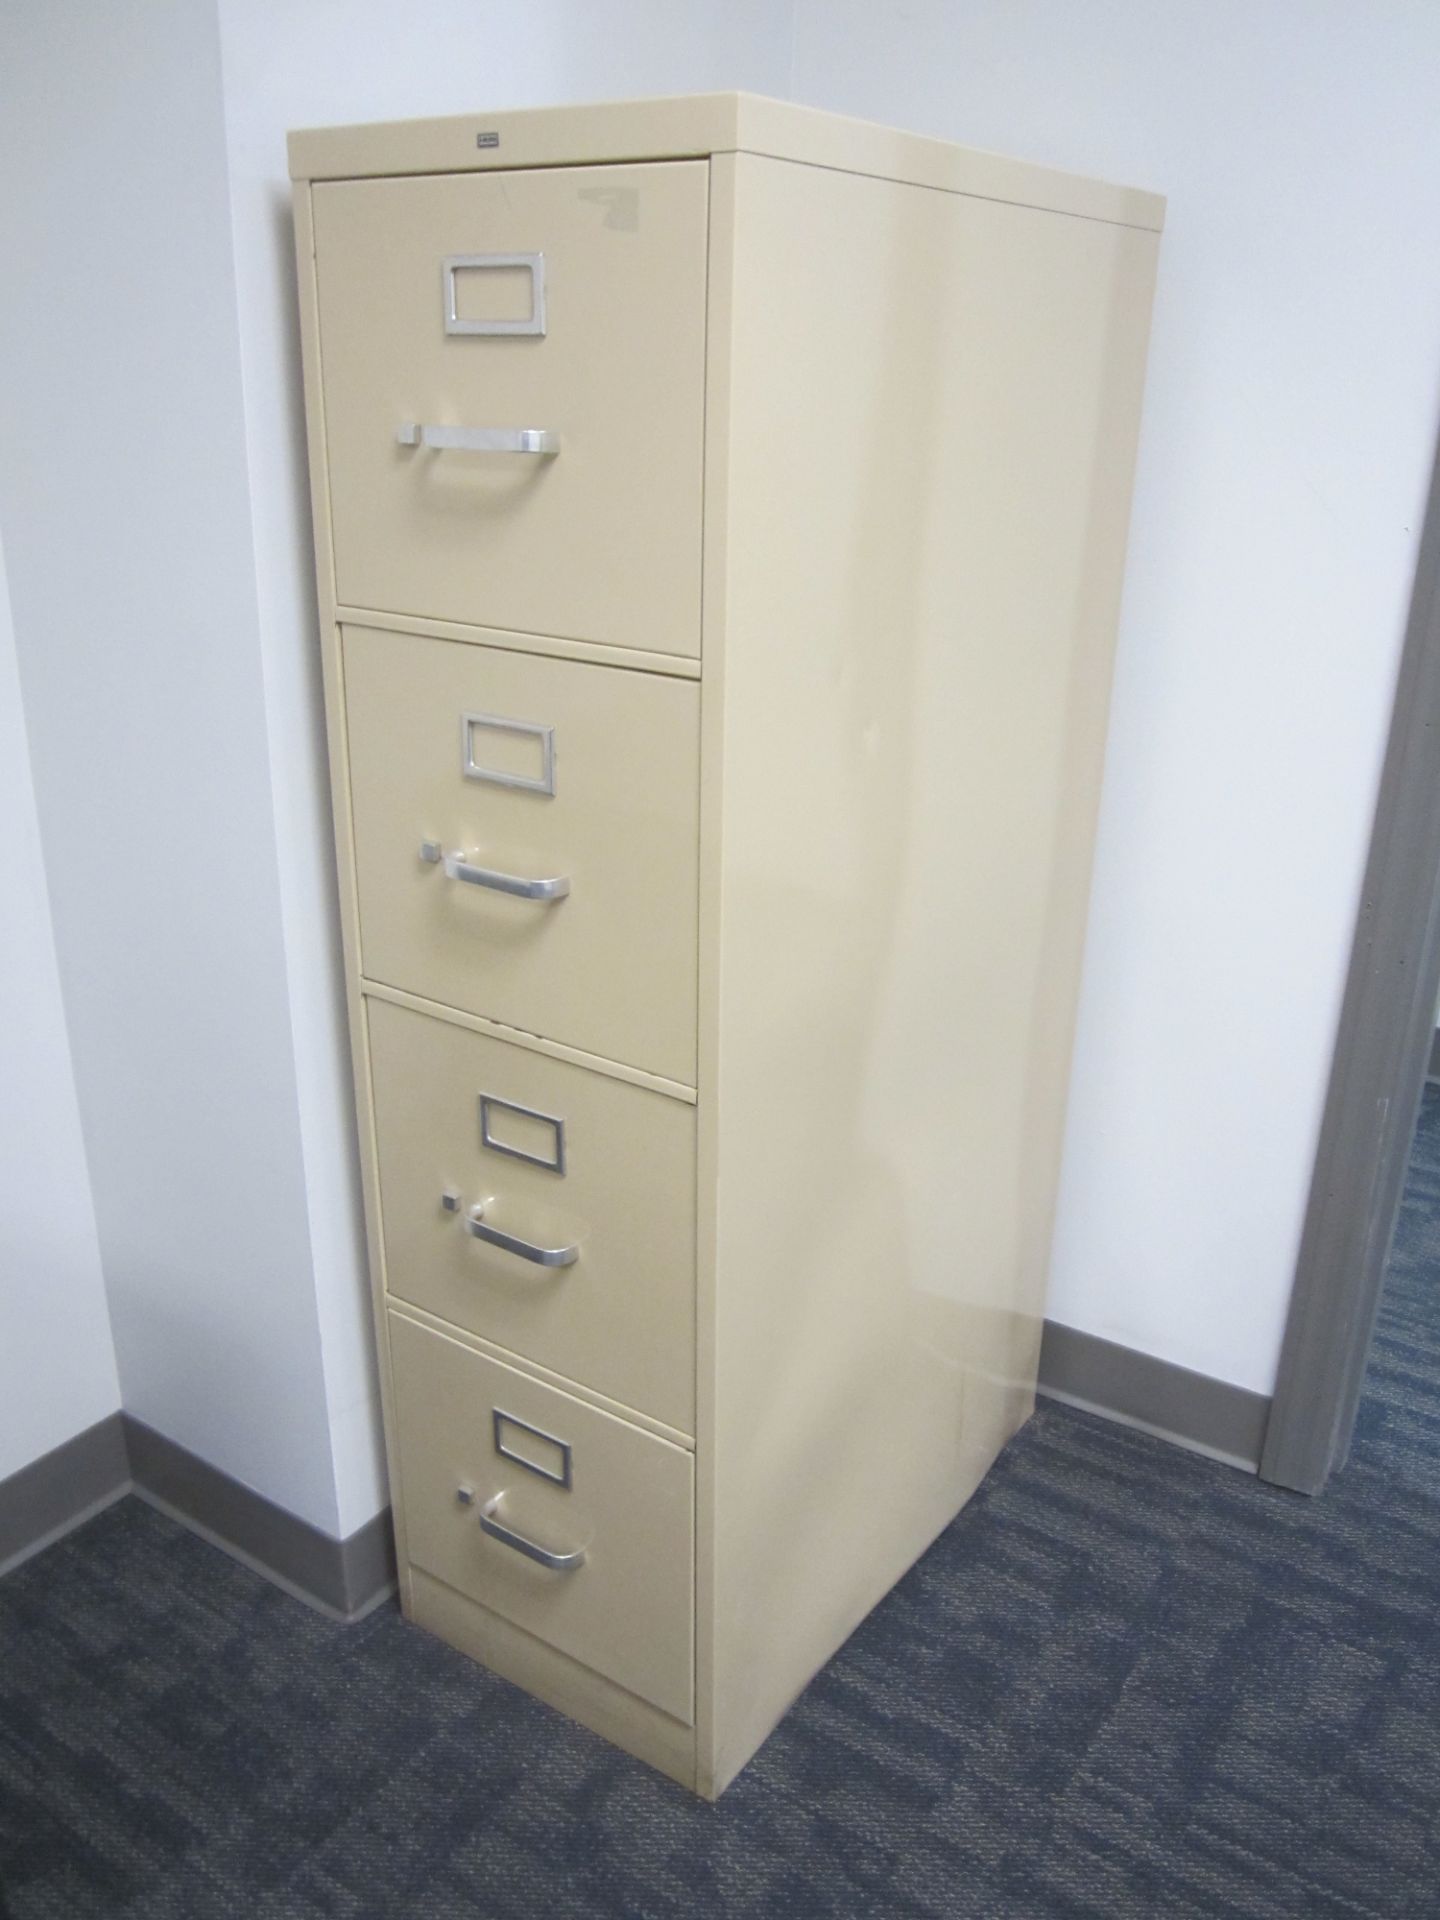 L-Shaped Desk with Backshelf, (2) 2-Drawer Lateral Files, and 4-Drawer File Cabinets - Image 3 of 3